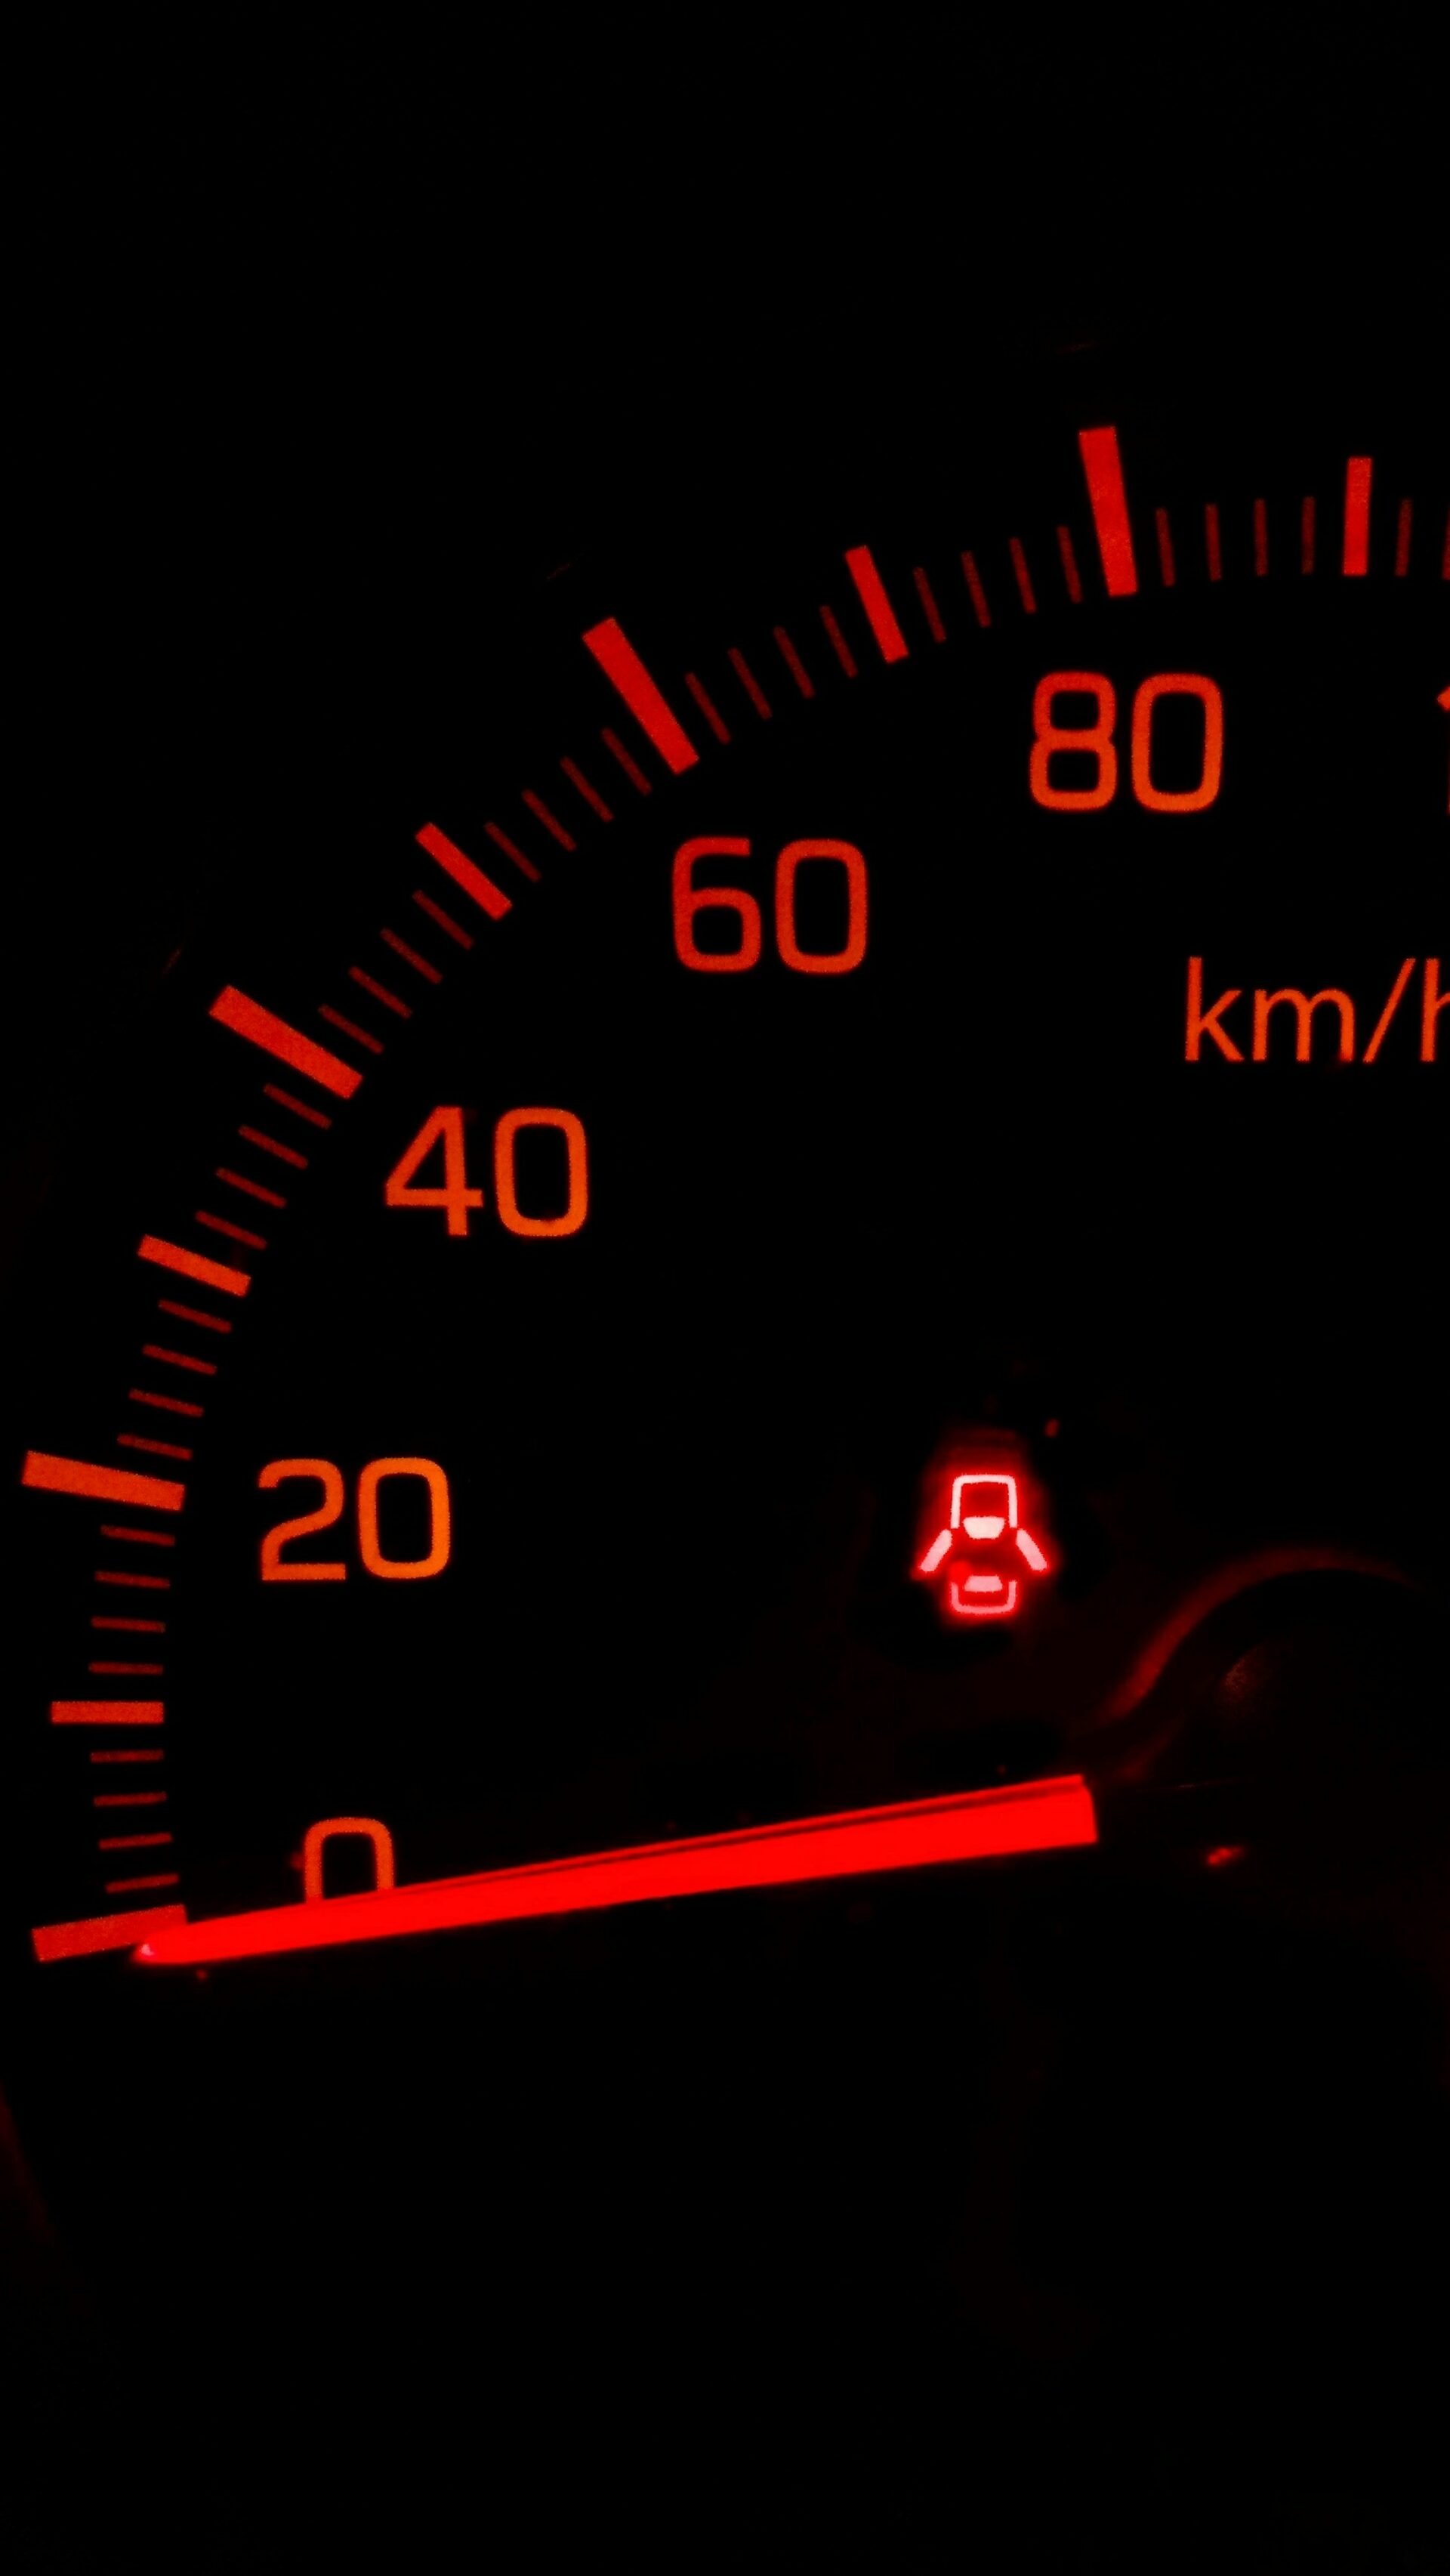 Black background with red numbers forming a circle showing speed of vehicle